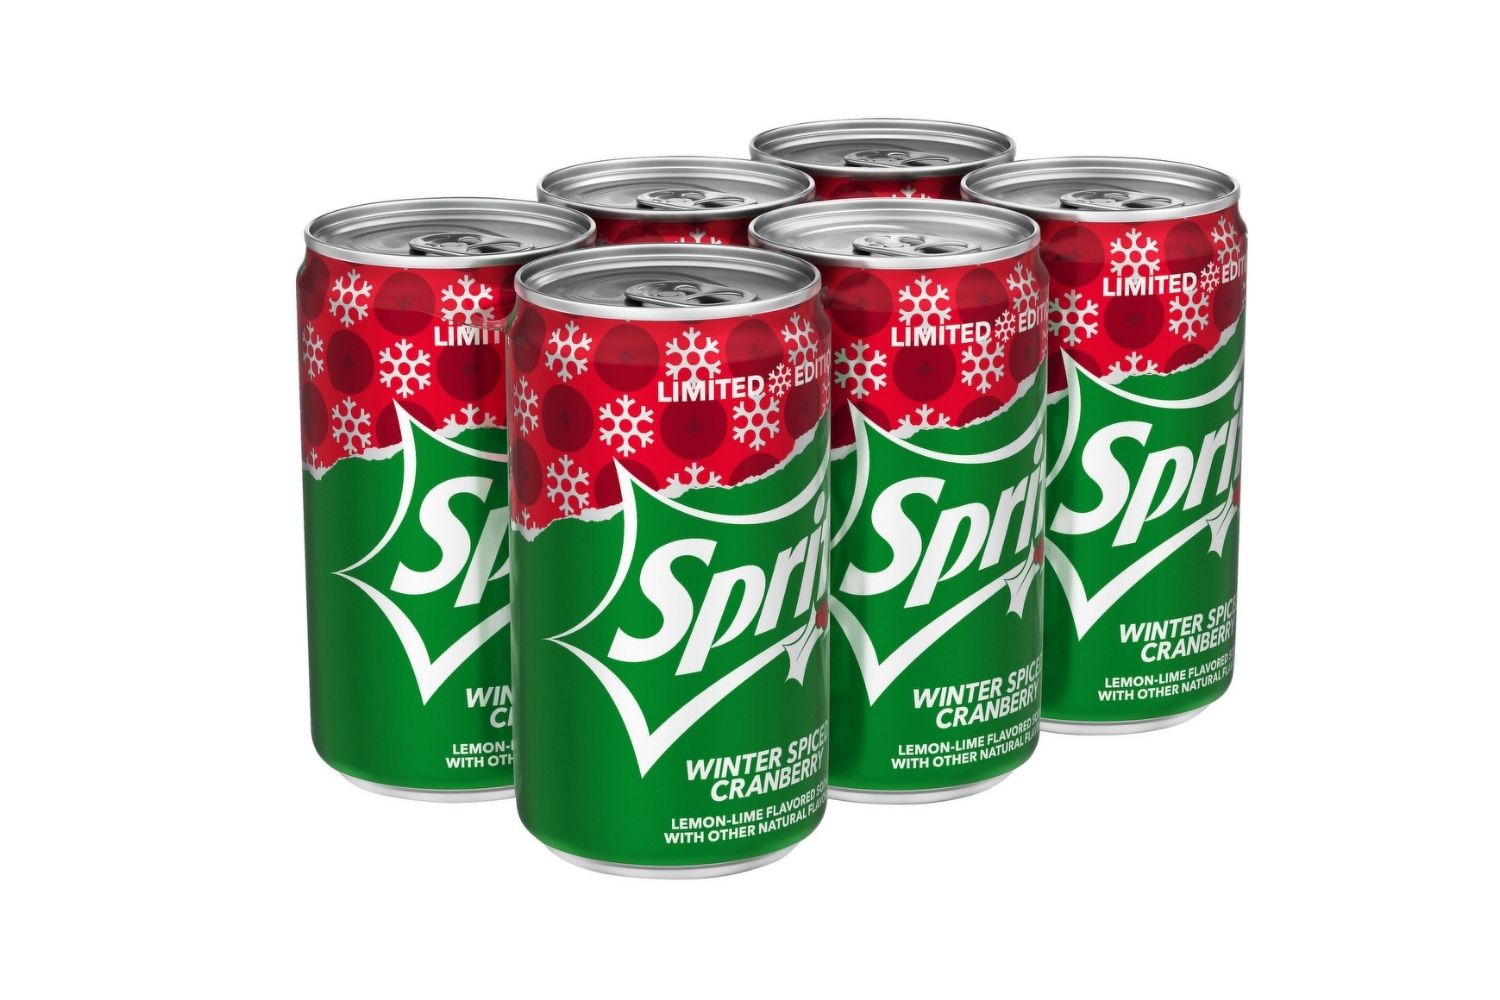 14 Fresh Facts About Sprite - The Fact Site